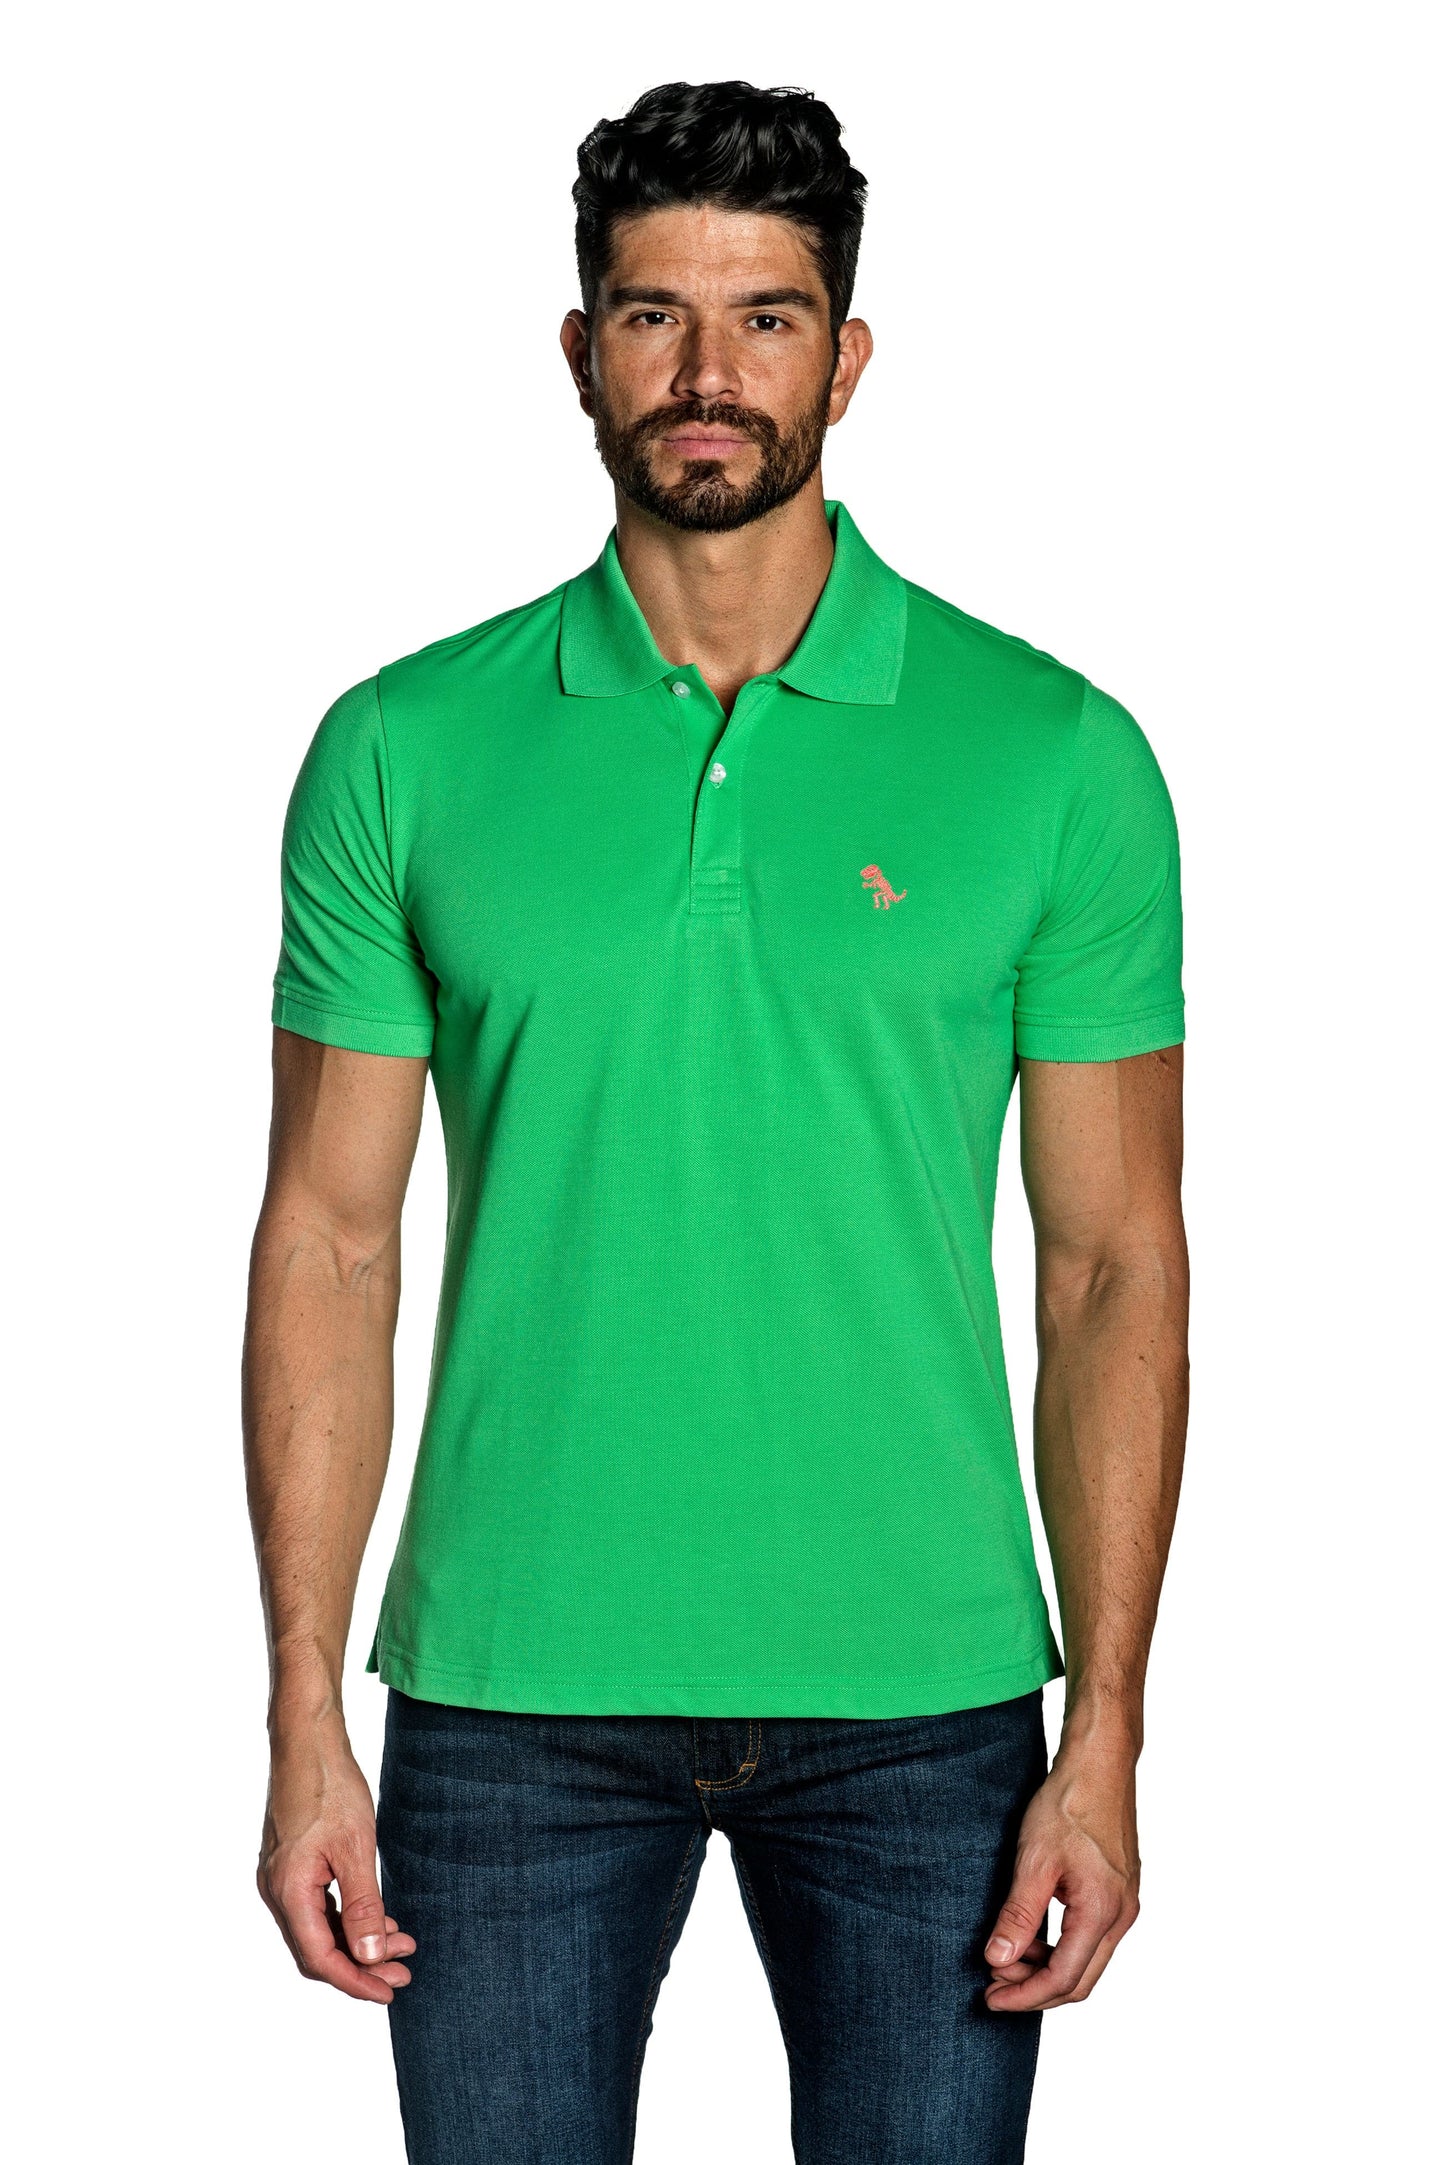 Green Mens Polo With Dinosaur Embroidery P-13.